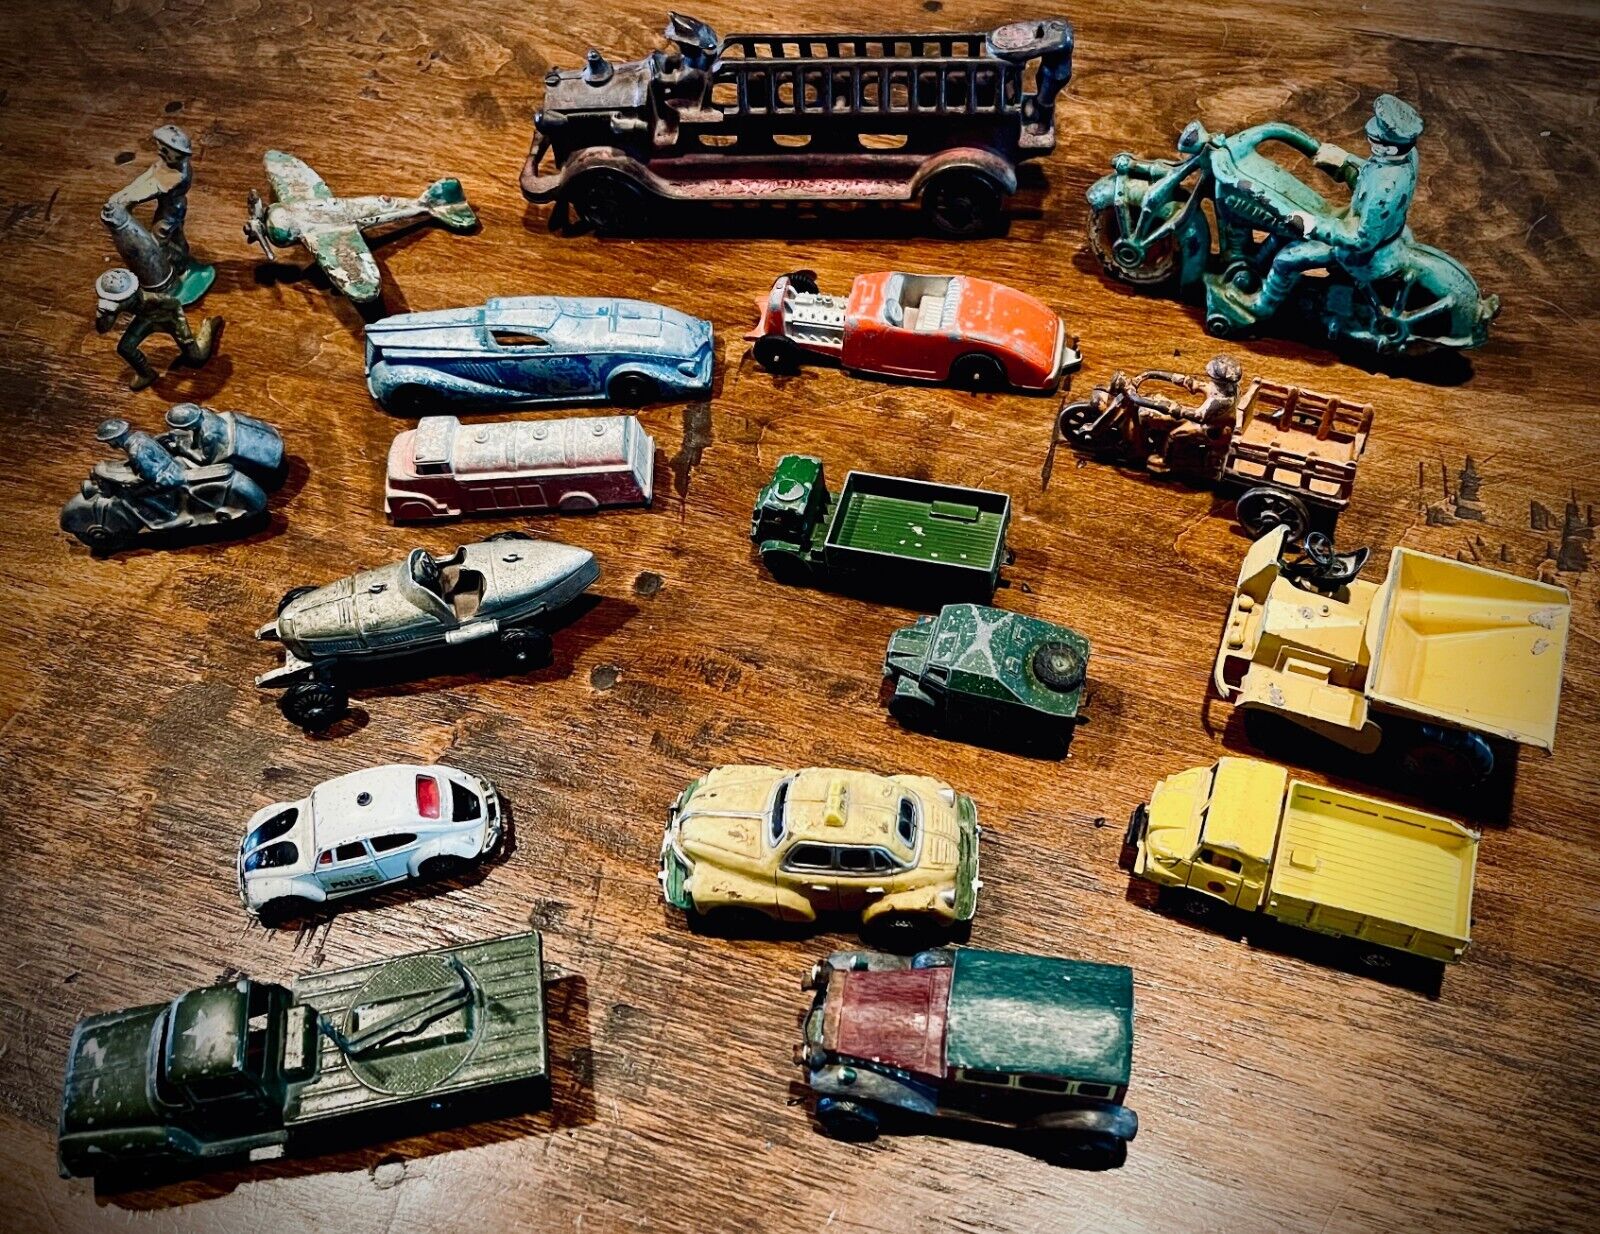 Vintage Toy Collection — Cars, Trucks, Motorcycles From the 1920s, 30s, 40s, 50s